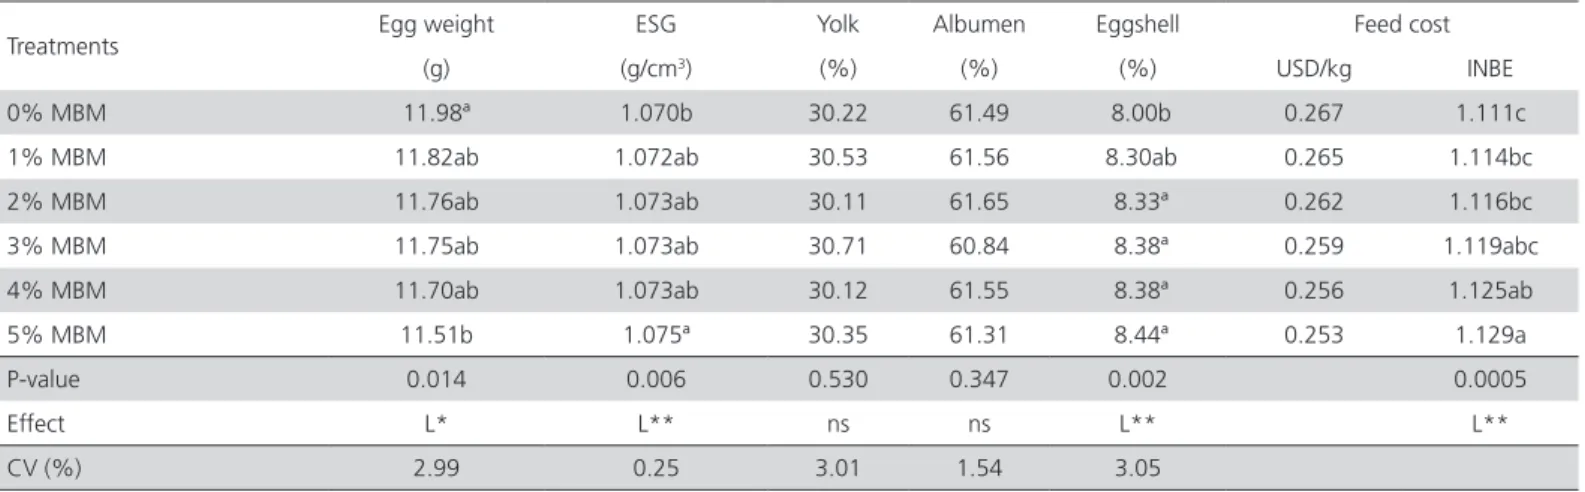 Table 3 – Egg quality, feed cost, and bio-economic nutritional index of laying Japanese quails fed different MBM levels.